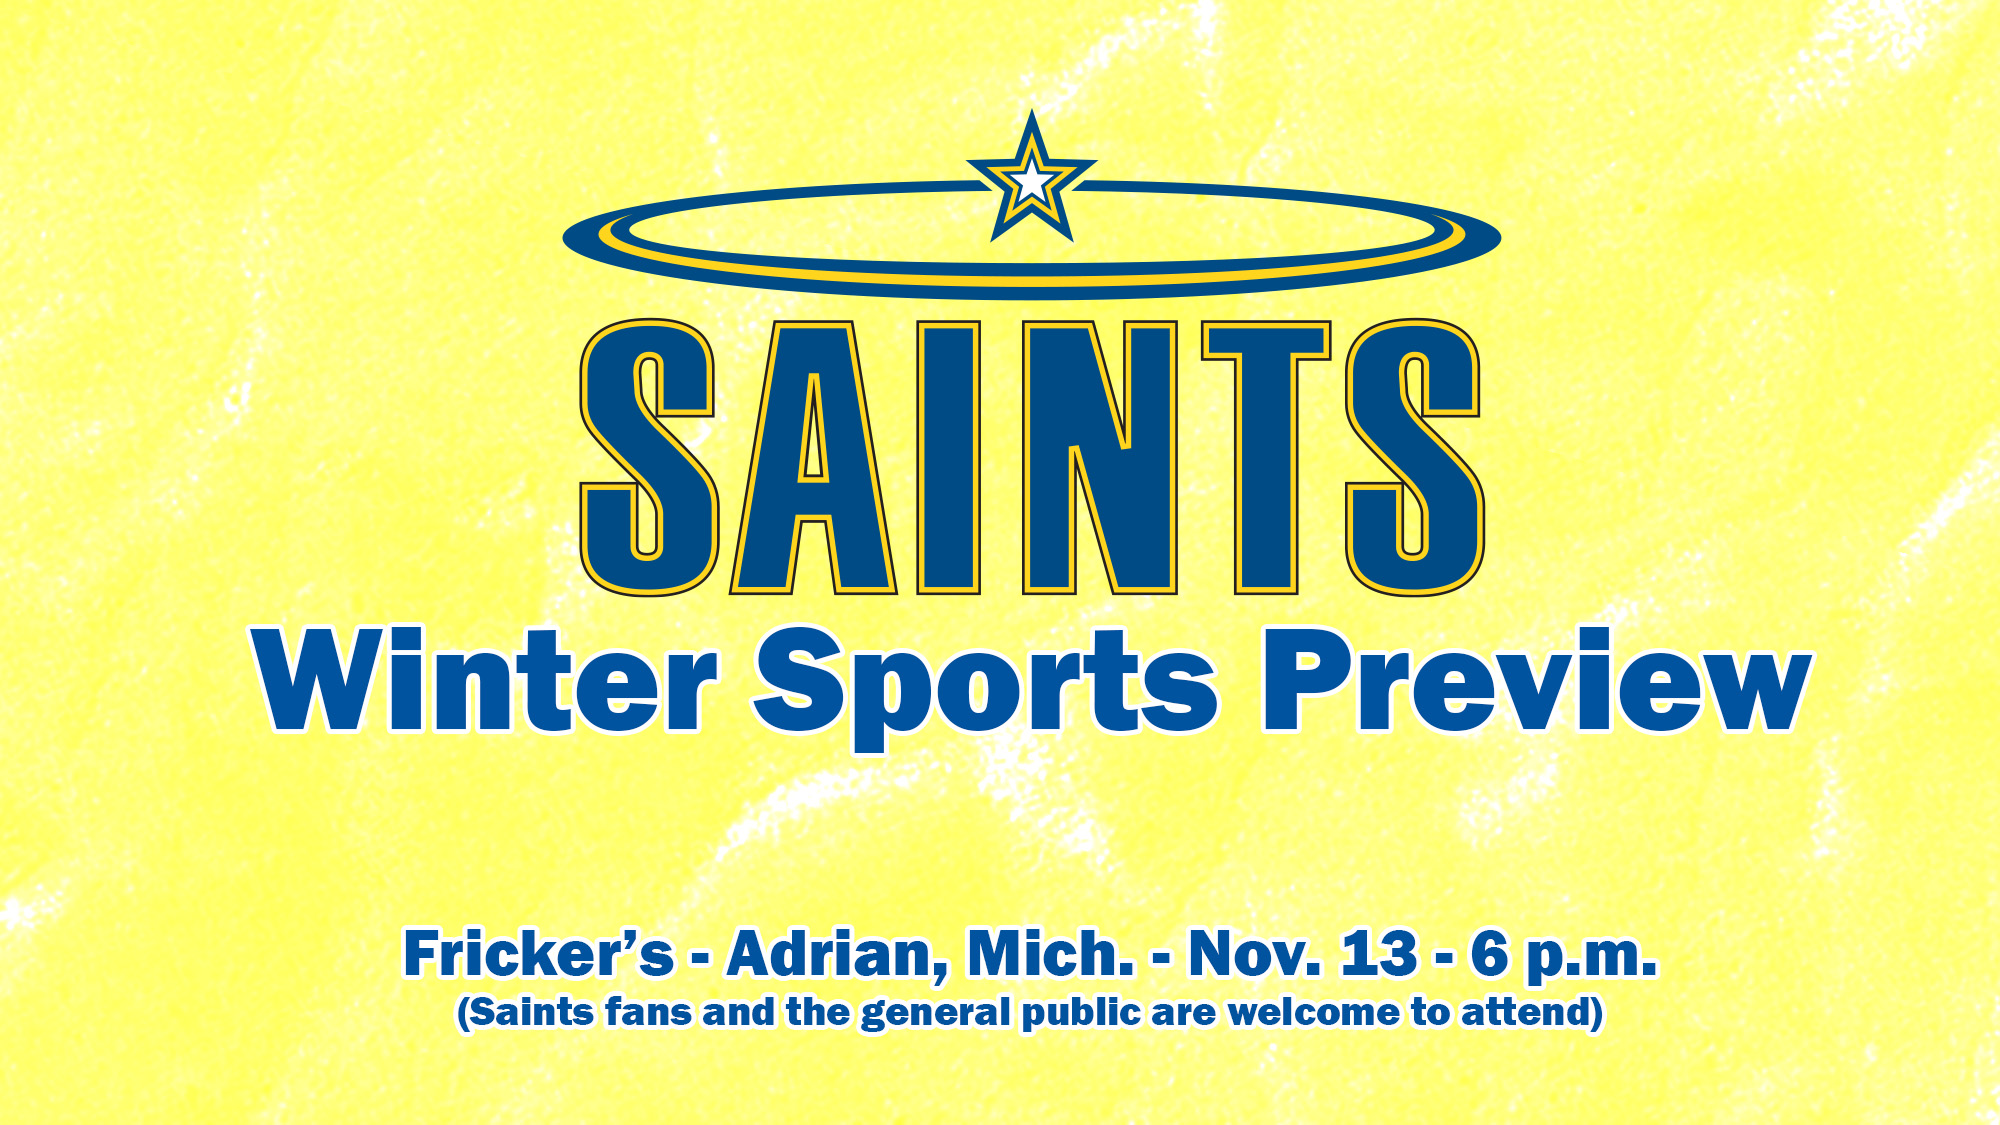 Winter Sports Preview on Nov. 13 at Fricker's